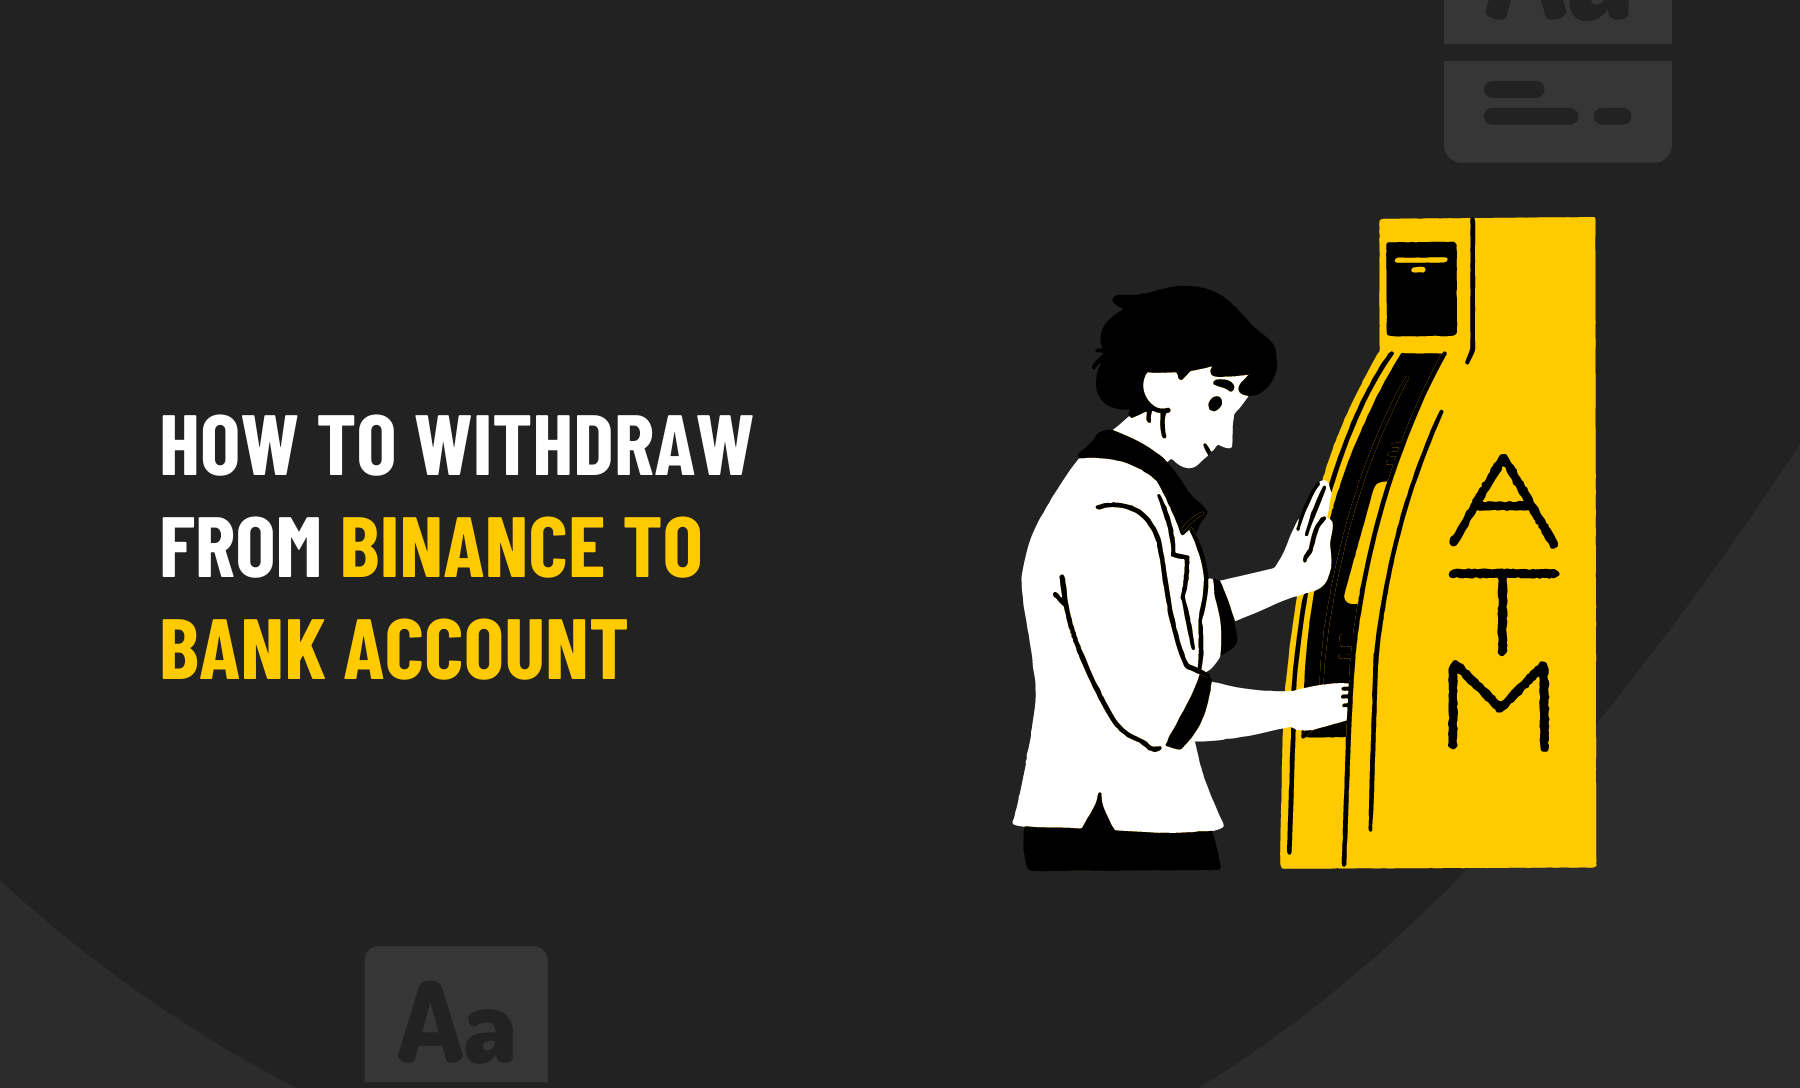 How To Withdraw From Binance To Bank Account